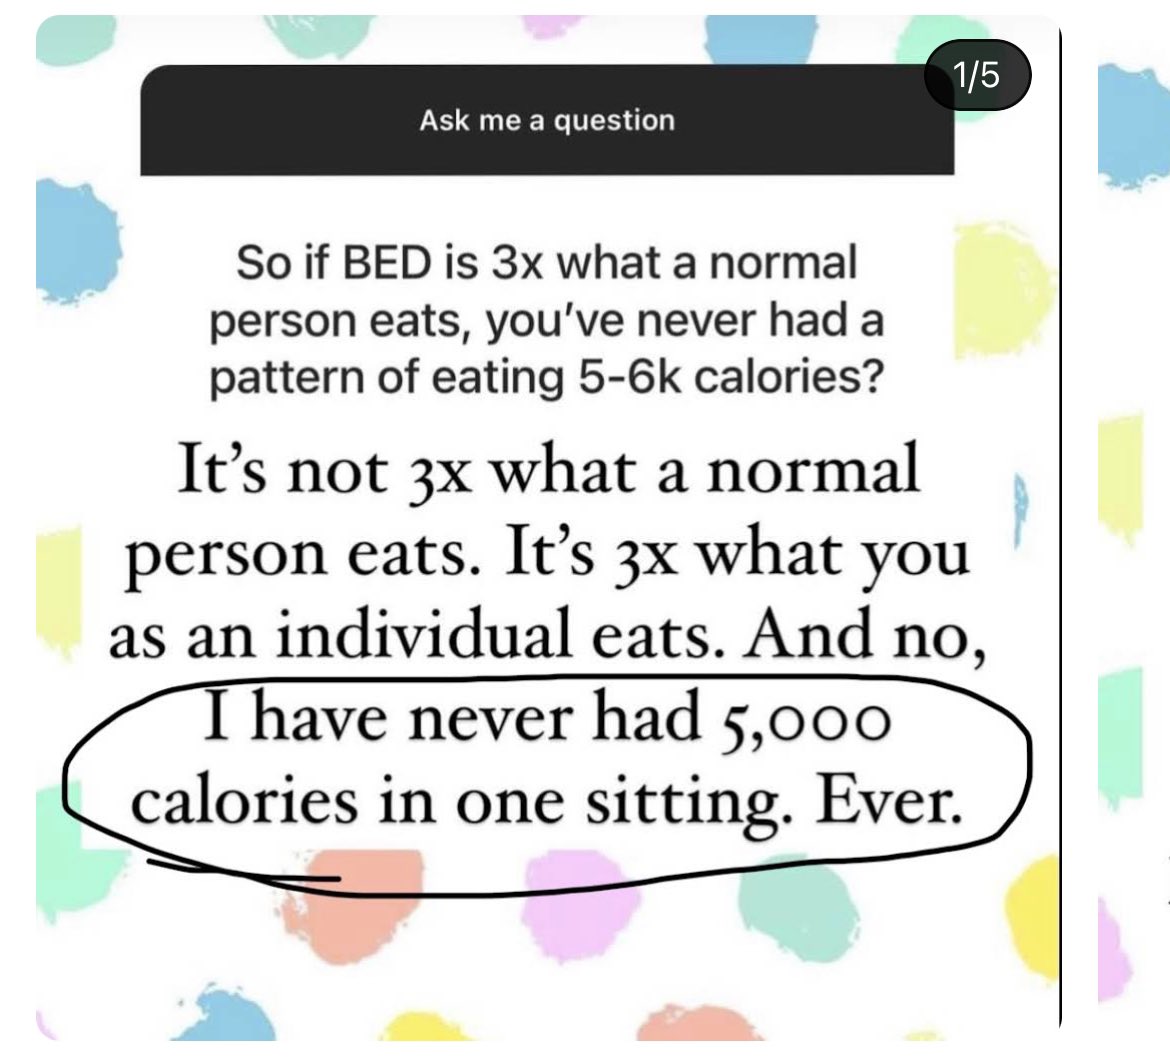 Amberlynn Reid still insists that a binge is not relative to what a normal person eats even though that’s the actual definition. Overconsumption of alcohol is relative to a normal persons intake of alcohol, you don’t compare it to an alcoholics intake.